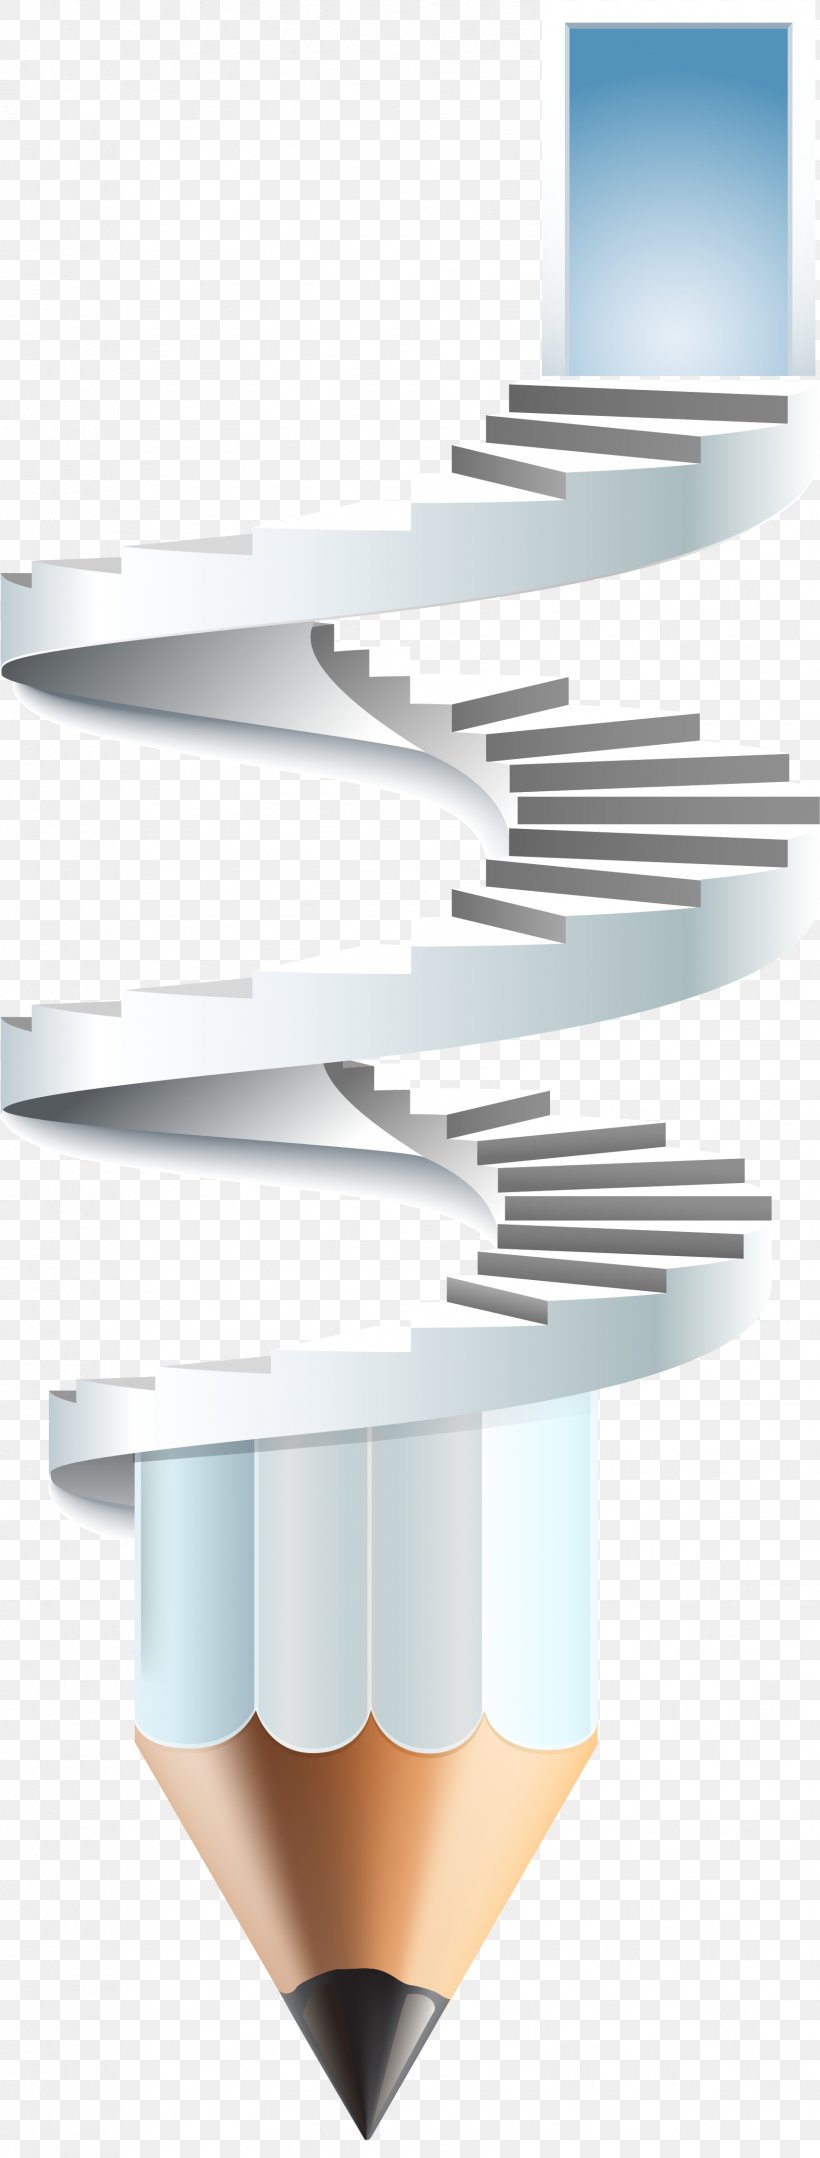 Stairs Pencil Creativity, PNG, 1707x4493px, Stairs, Creativity, Designer, Pen, Pencil Download Free